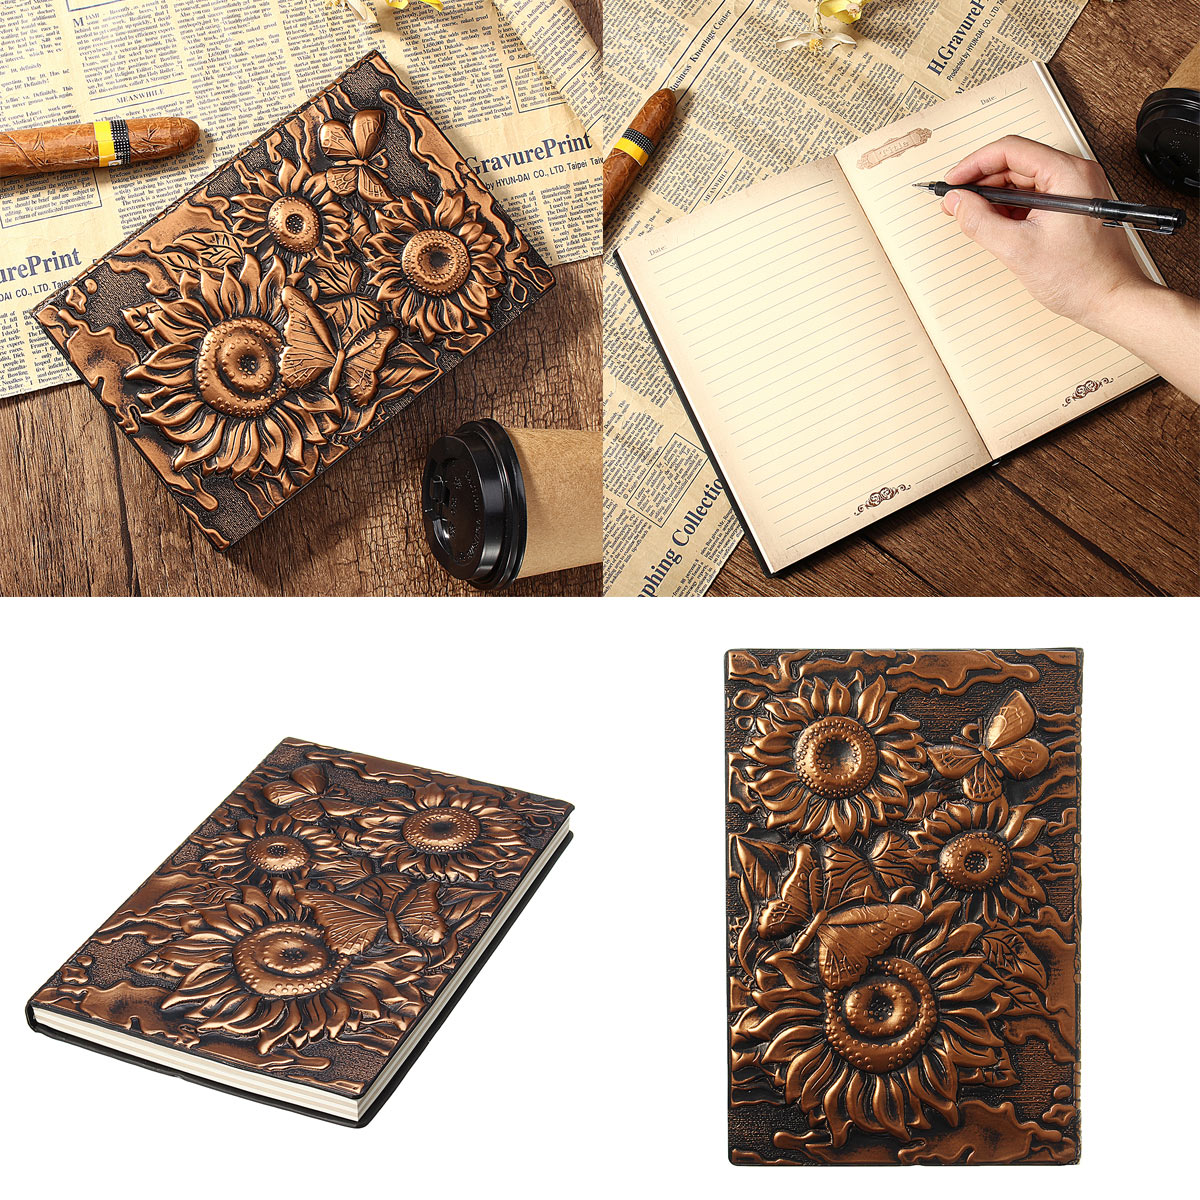 

Vintage 3D EmbossedSunflower Travel Diary Notebook Journal Leather Notepad